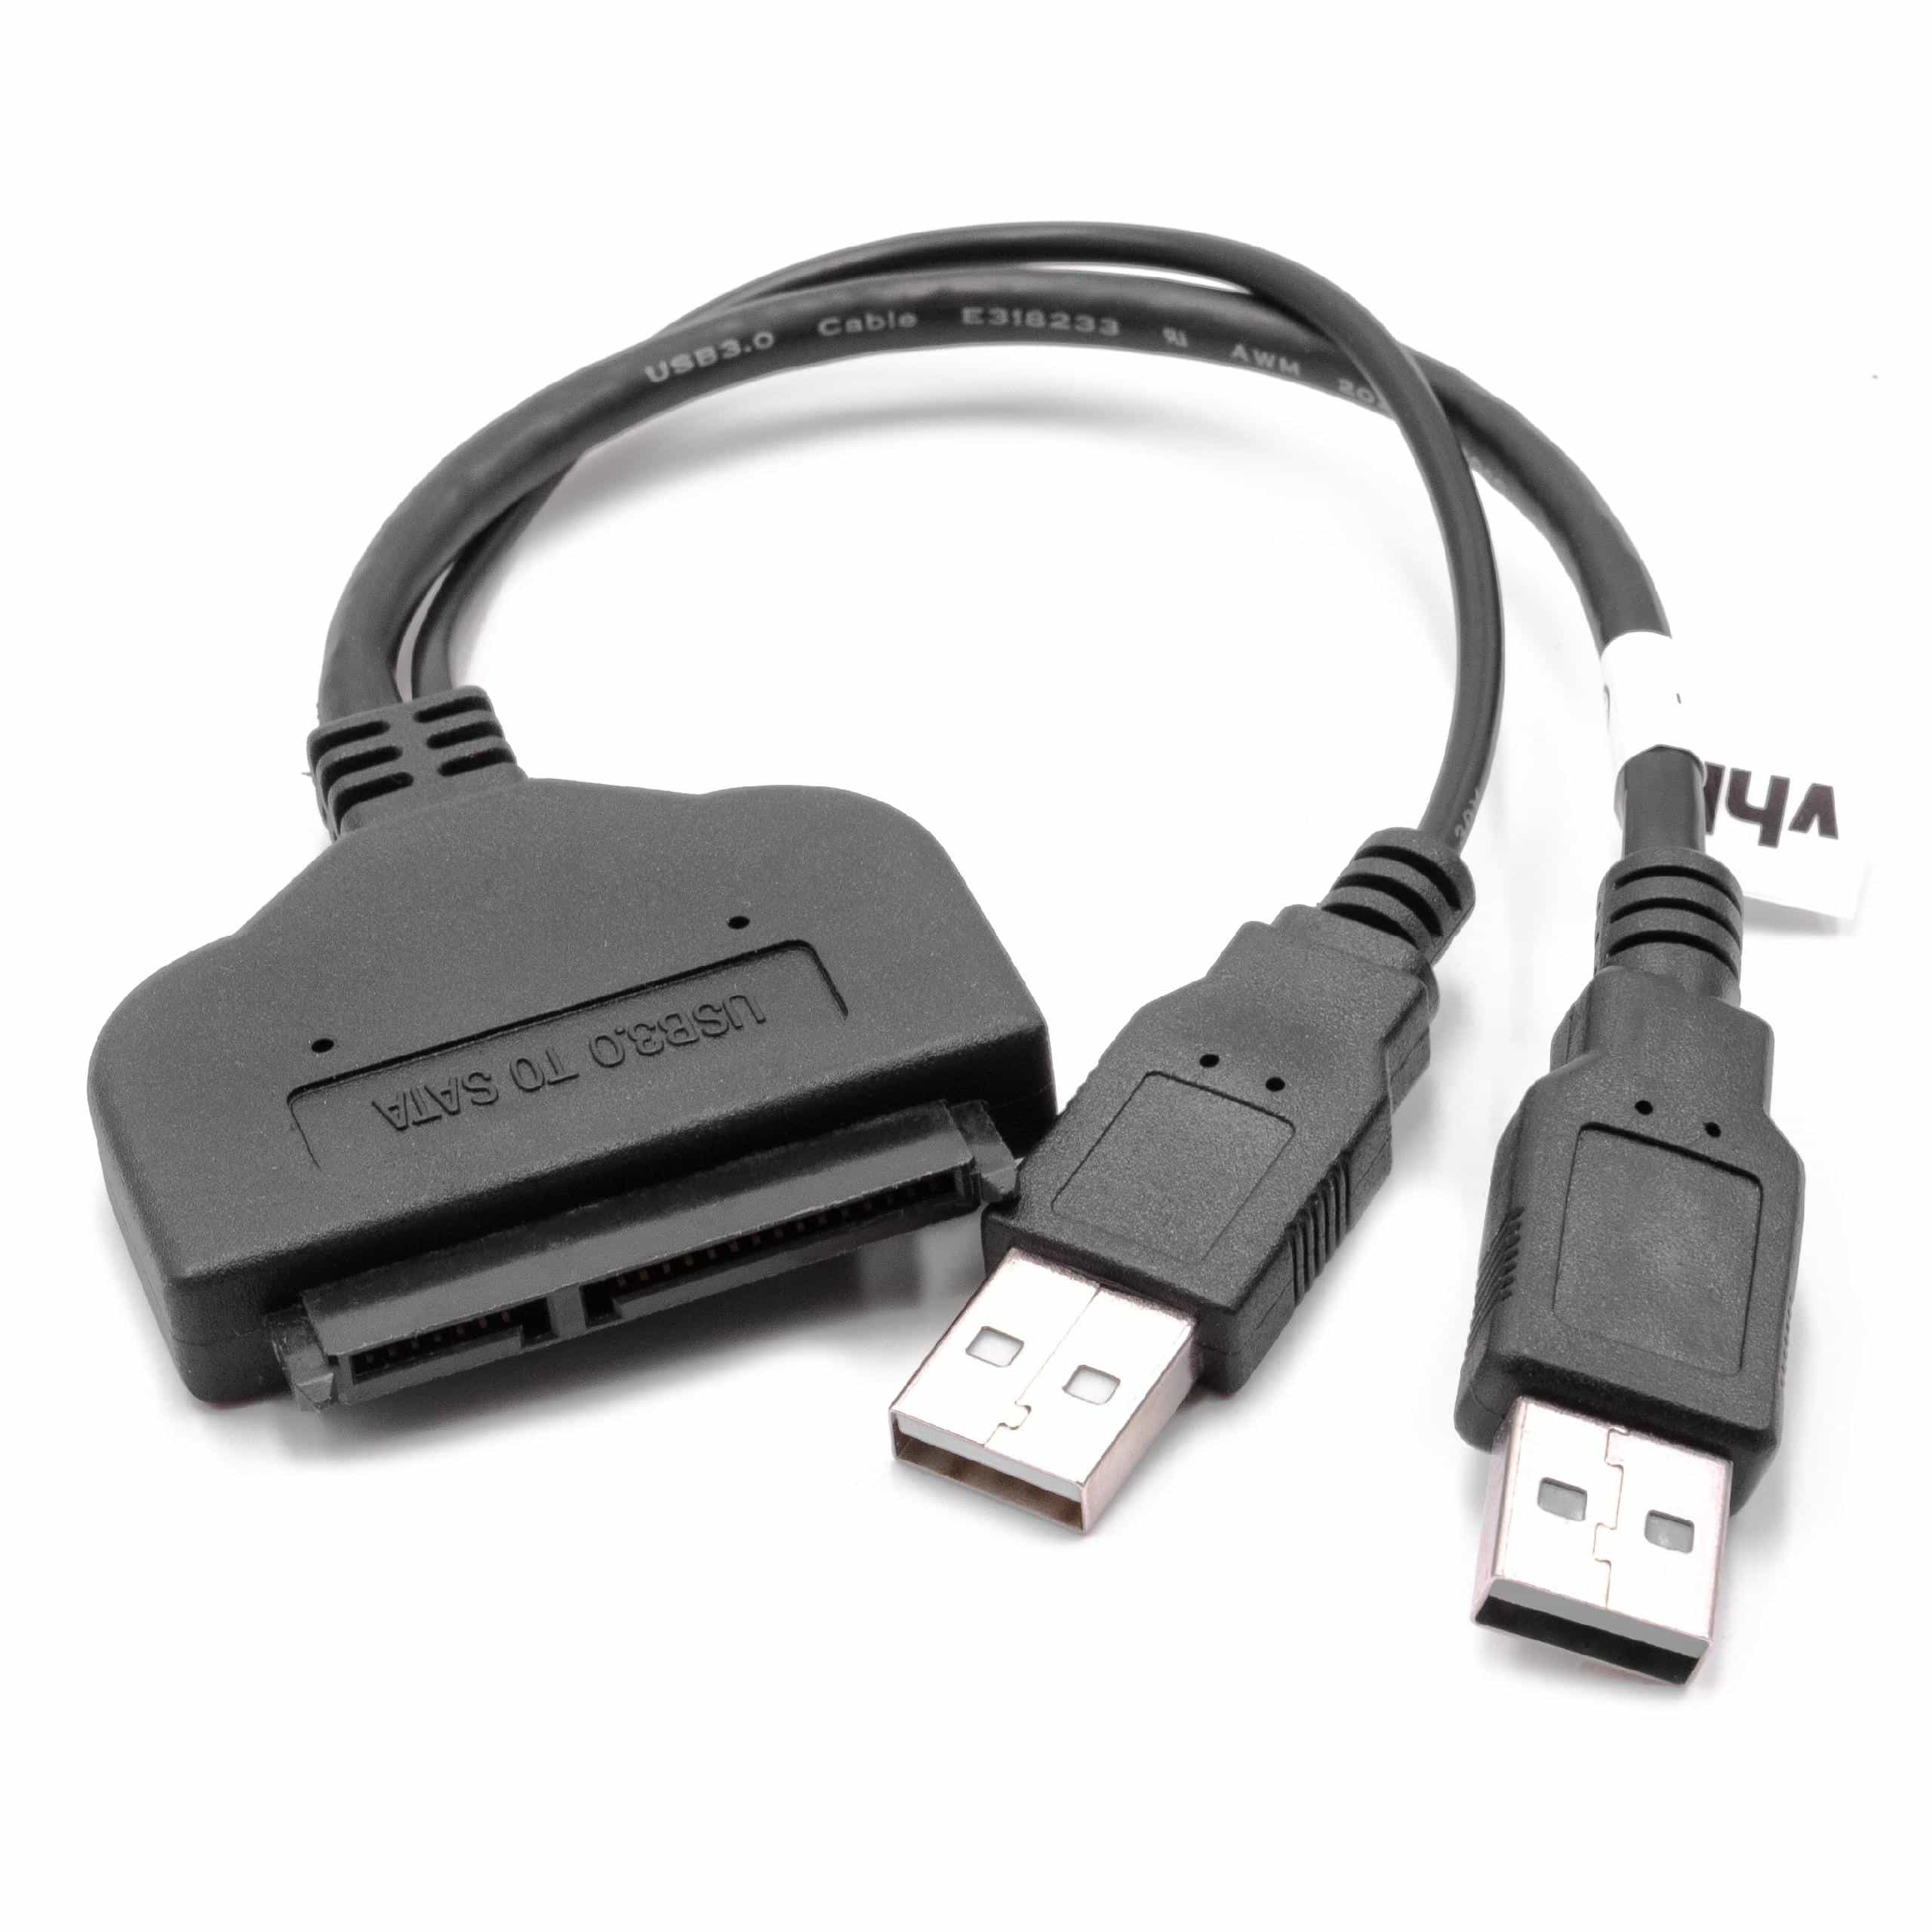 SATA III to USB 3.0 External Hard Drive Adapter Cable for HDD, SSD External Hard Drives, Plug-and-Play black